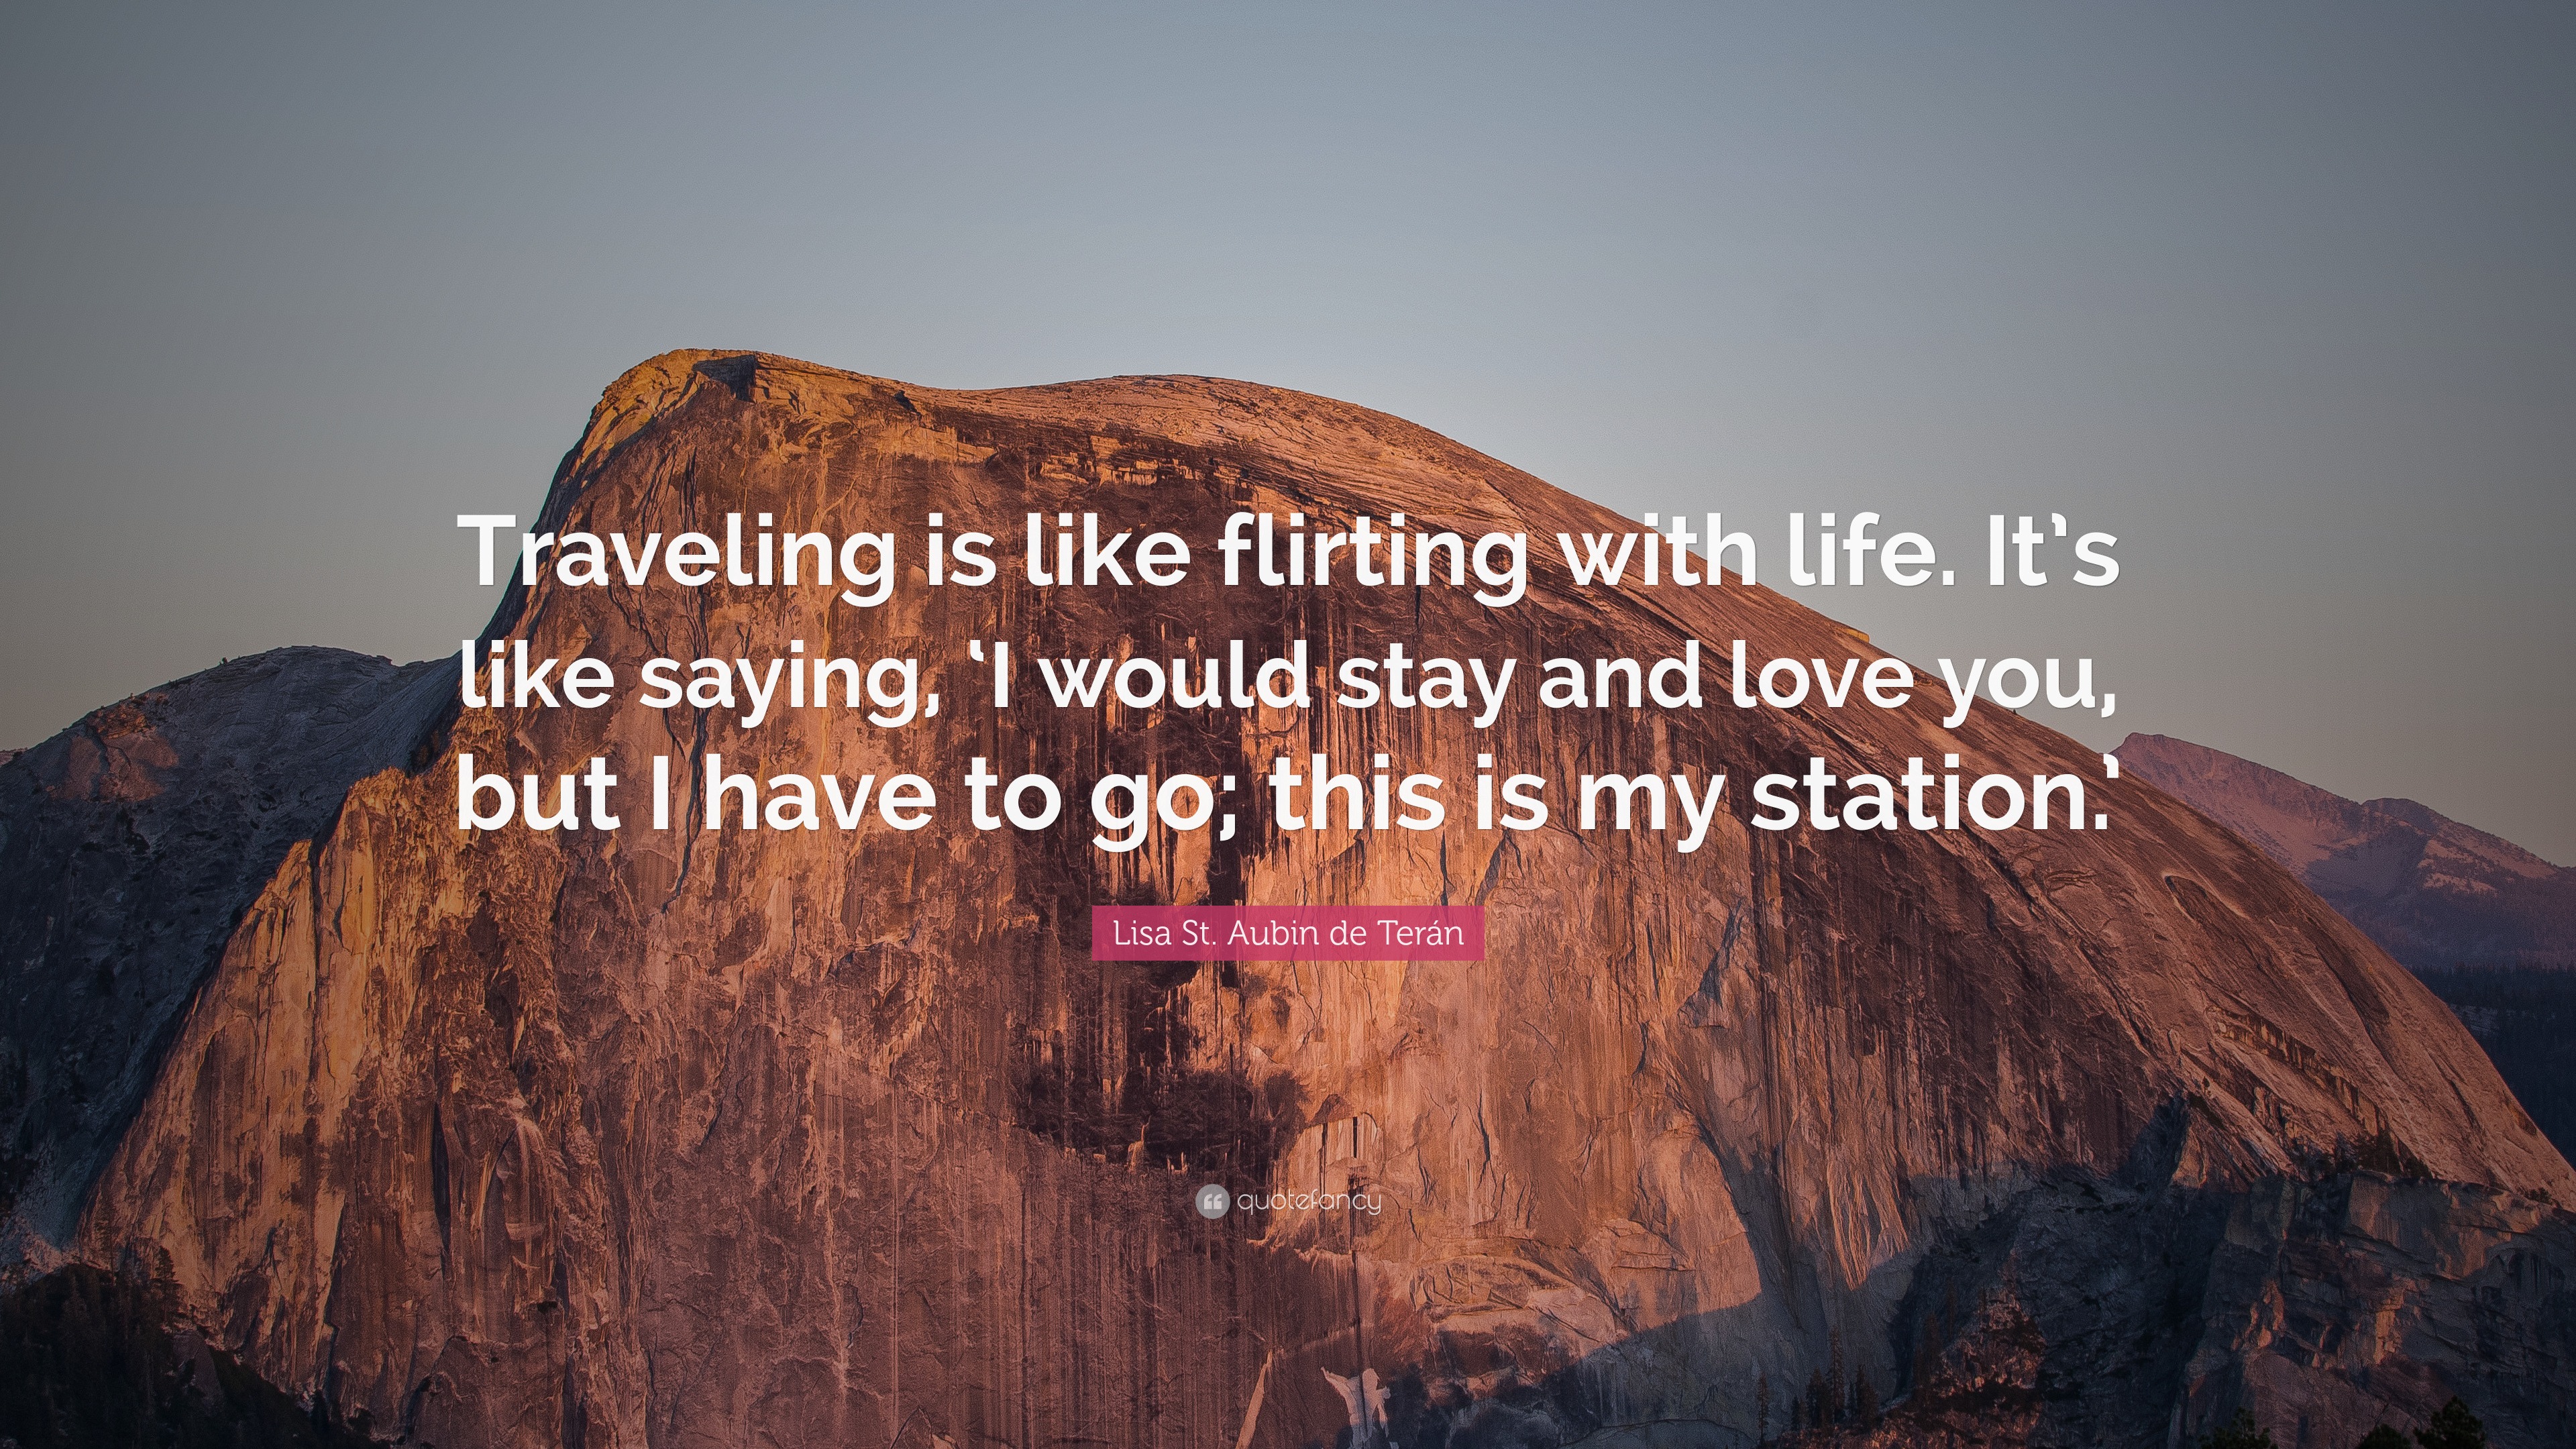 travel is like flirting with life